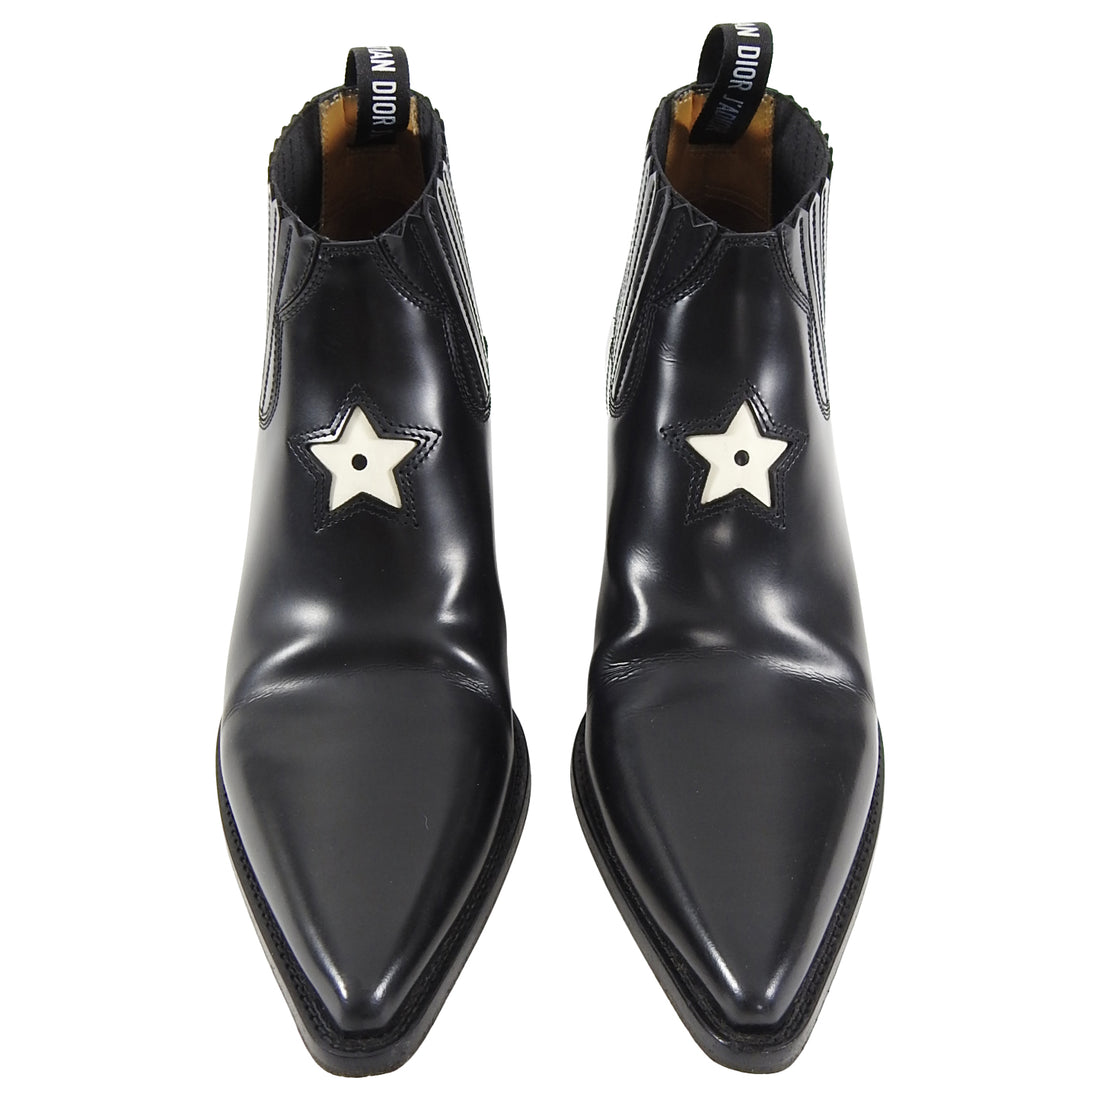 Dior LA Black Western Ankle Boots with Star Detail - 38